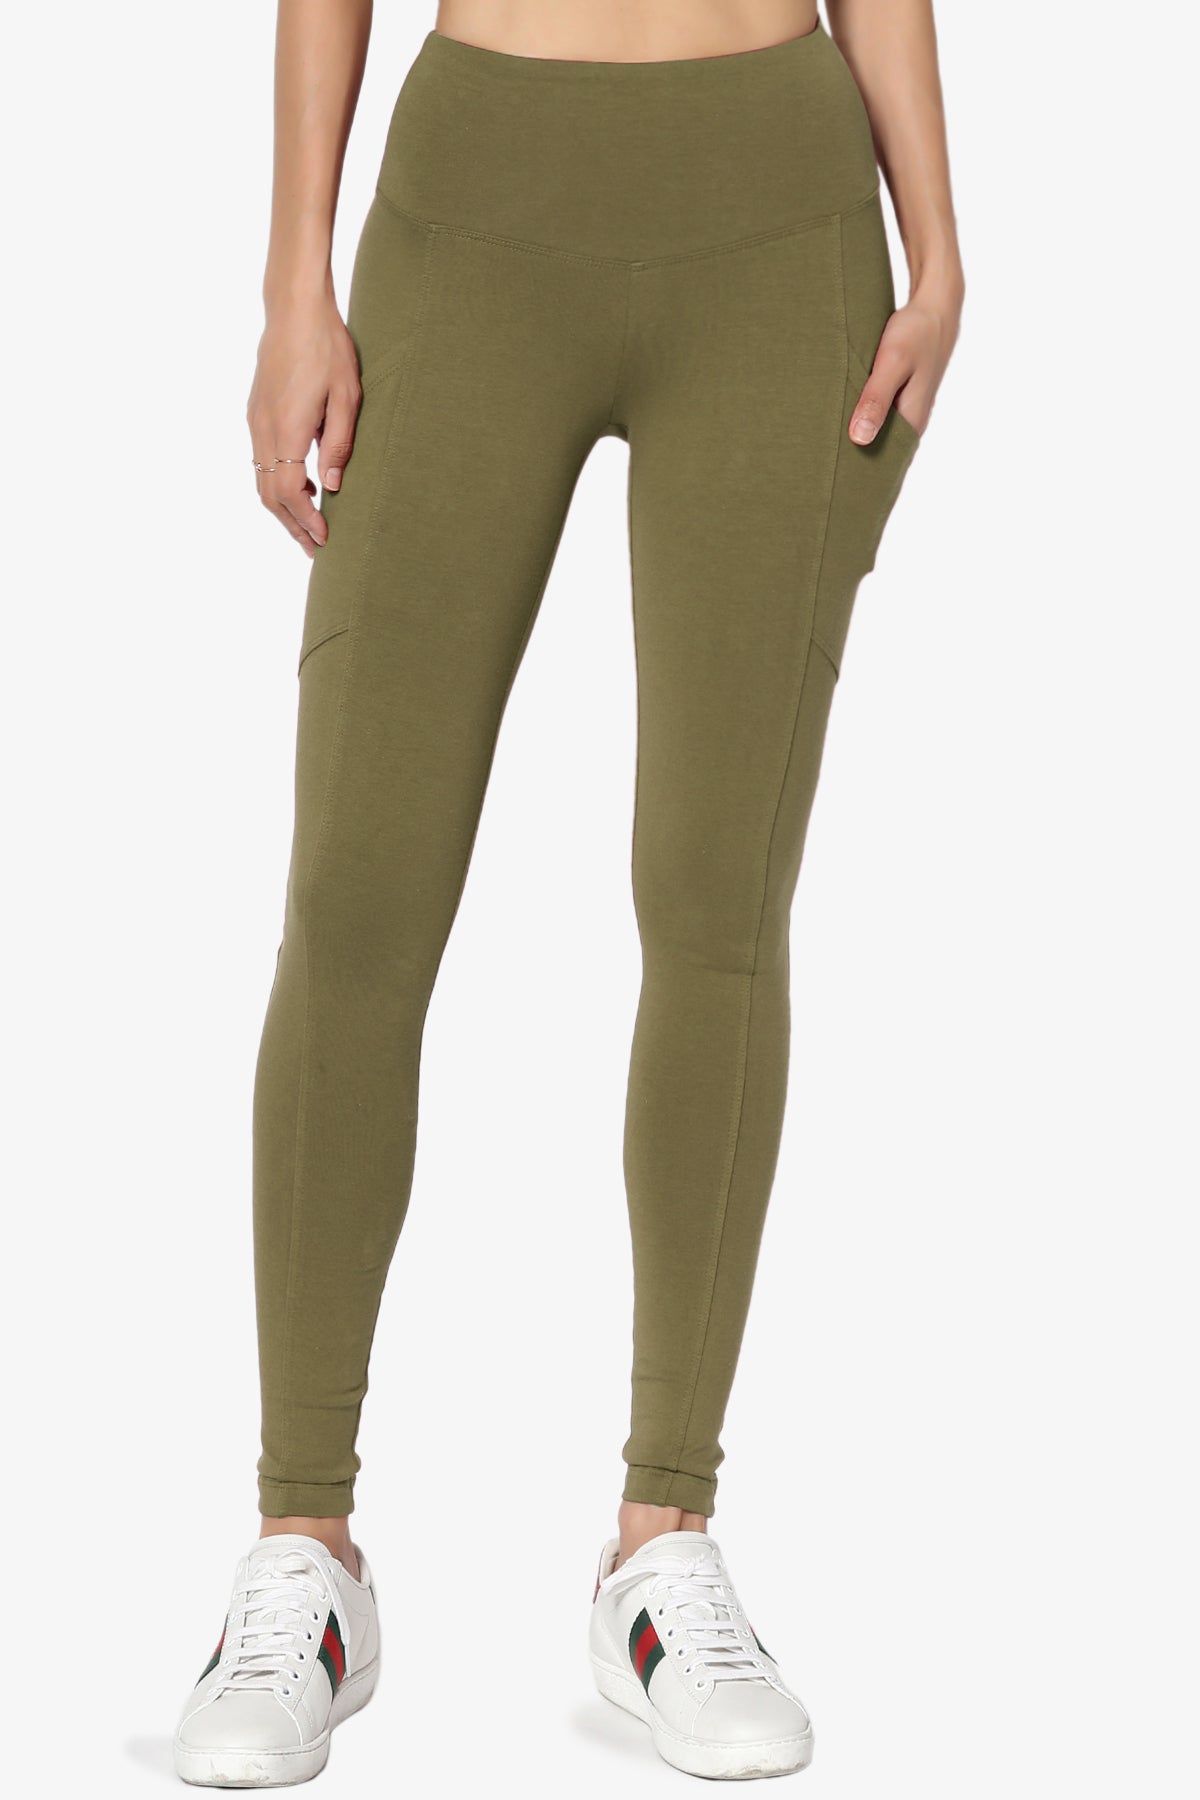 Ansley Luxe Cotton Leggings with Pockets OLIVE KHAKI_3